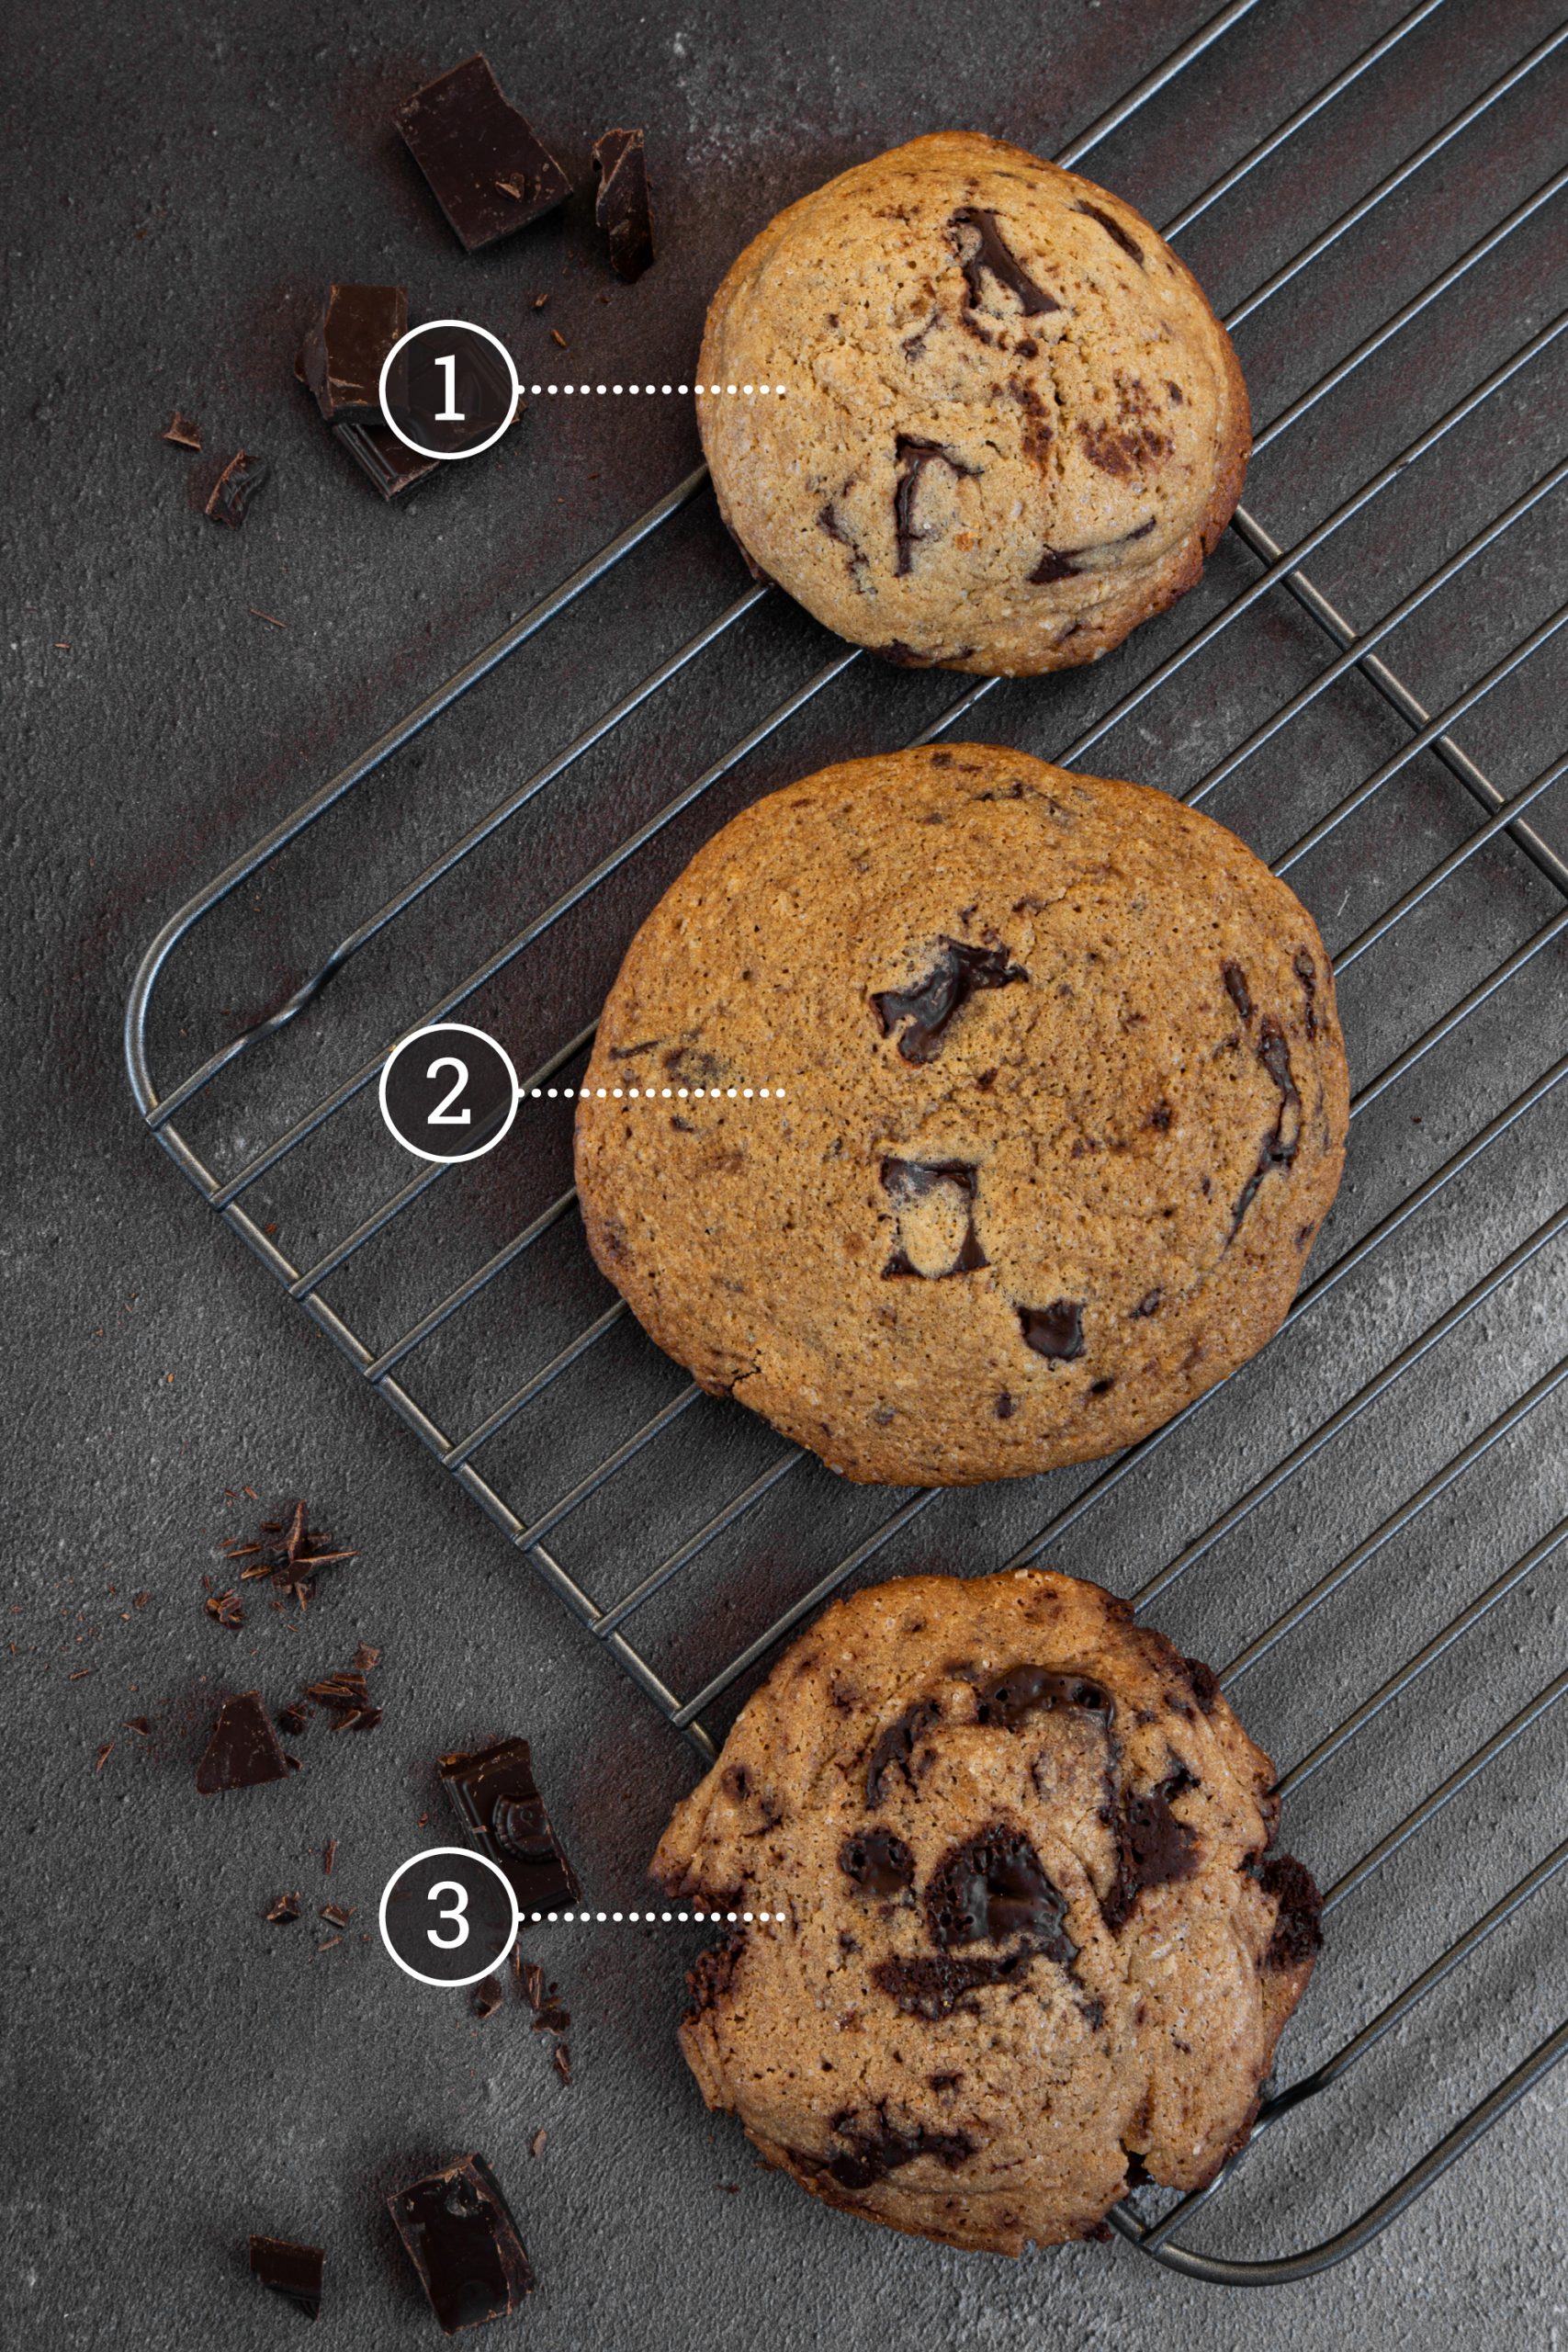 Comparison of chocolate chip cookies, that were baked after chilling, without chilling and without baking soda